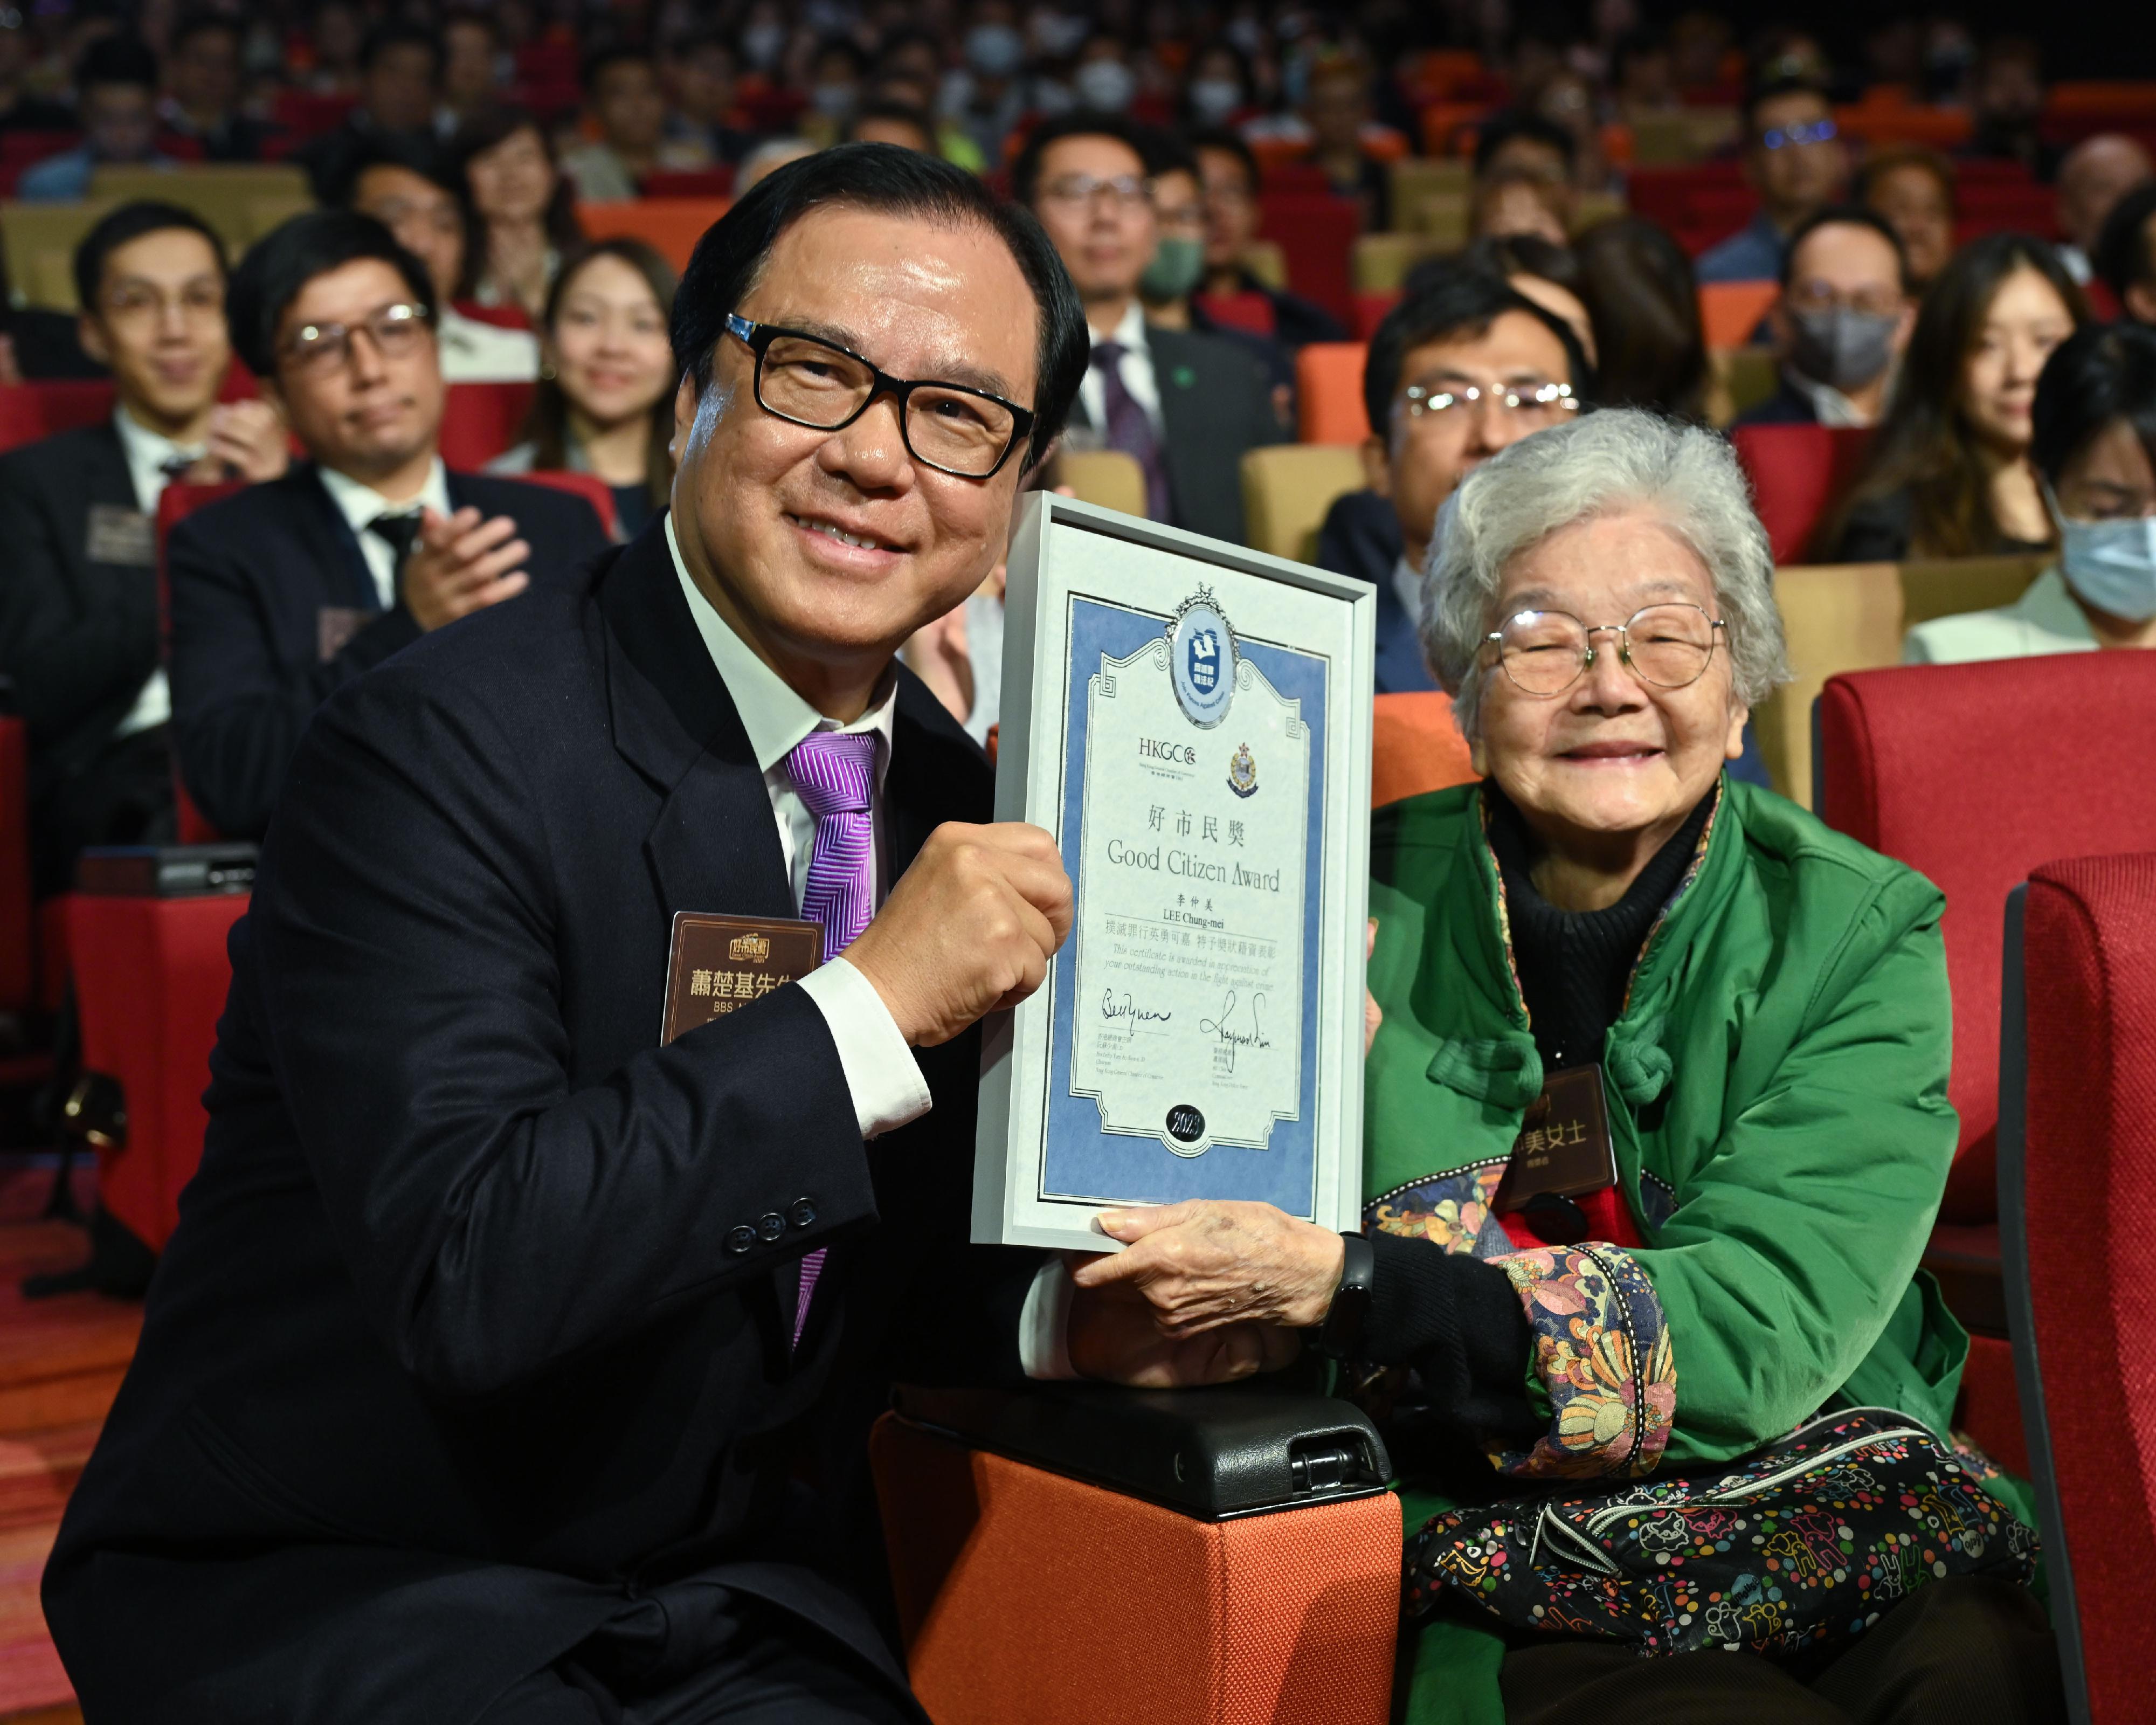 The Good Citizen Award Presentation Ceremony 2023 was held today (March 17). Picture shows member of the Fight Crime Committee, Mr Siu Chor-kee (left), presenting the Good Citizen Award to the eldest awardee of this year, Ms Lee Chung-mei, who is 84 years old.